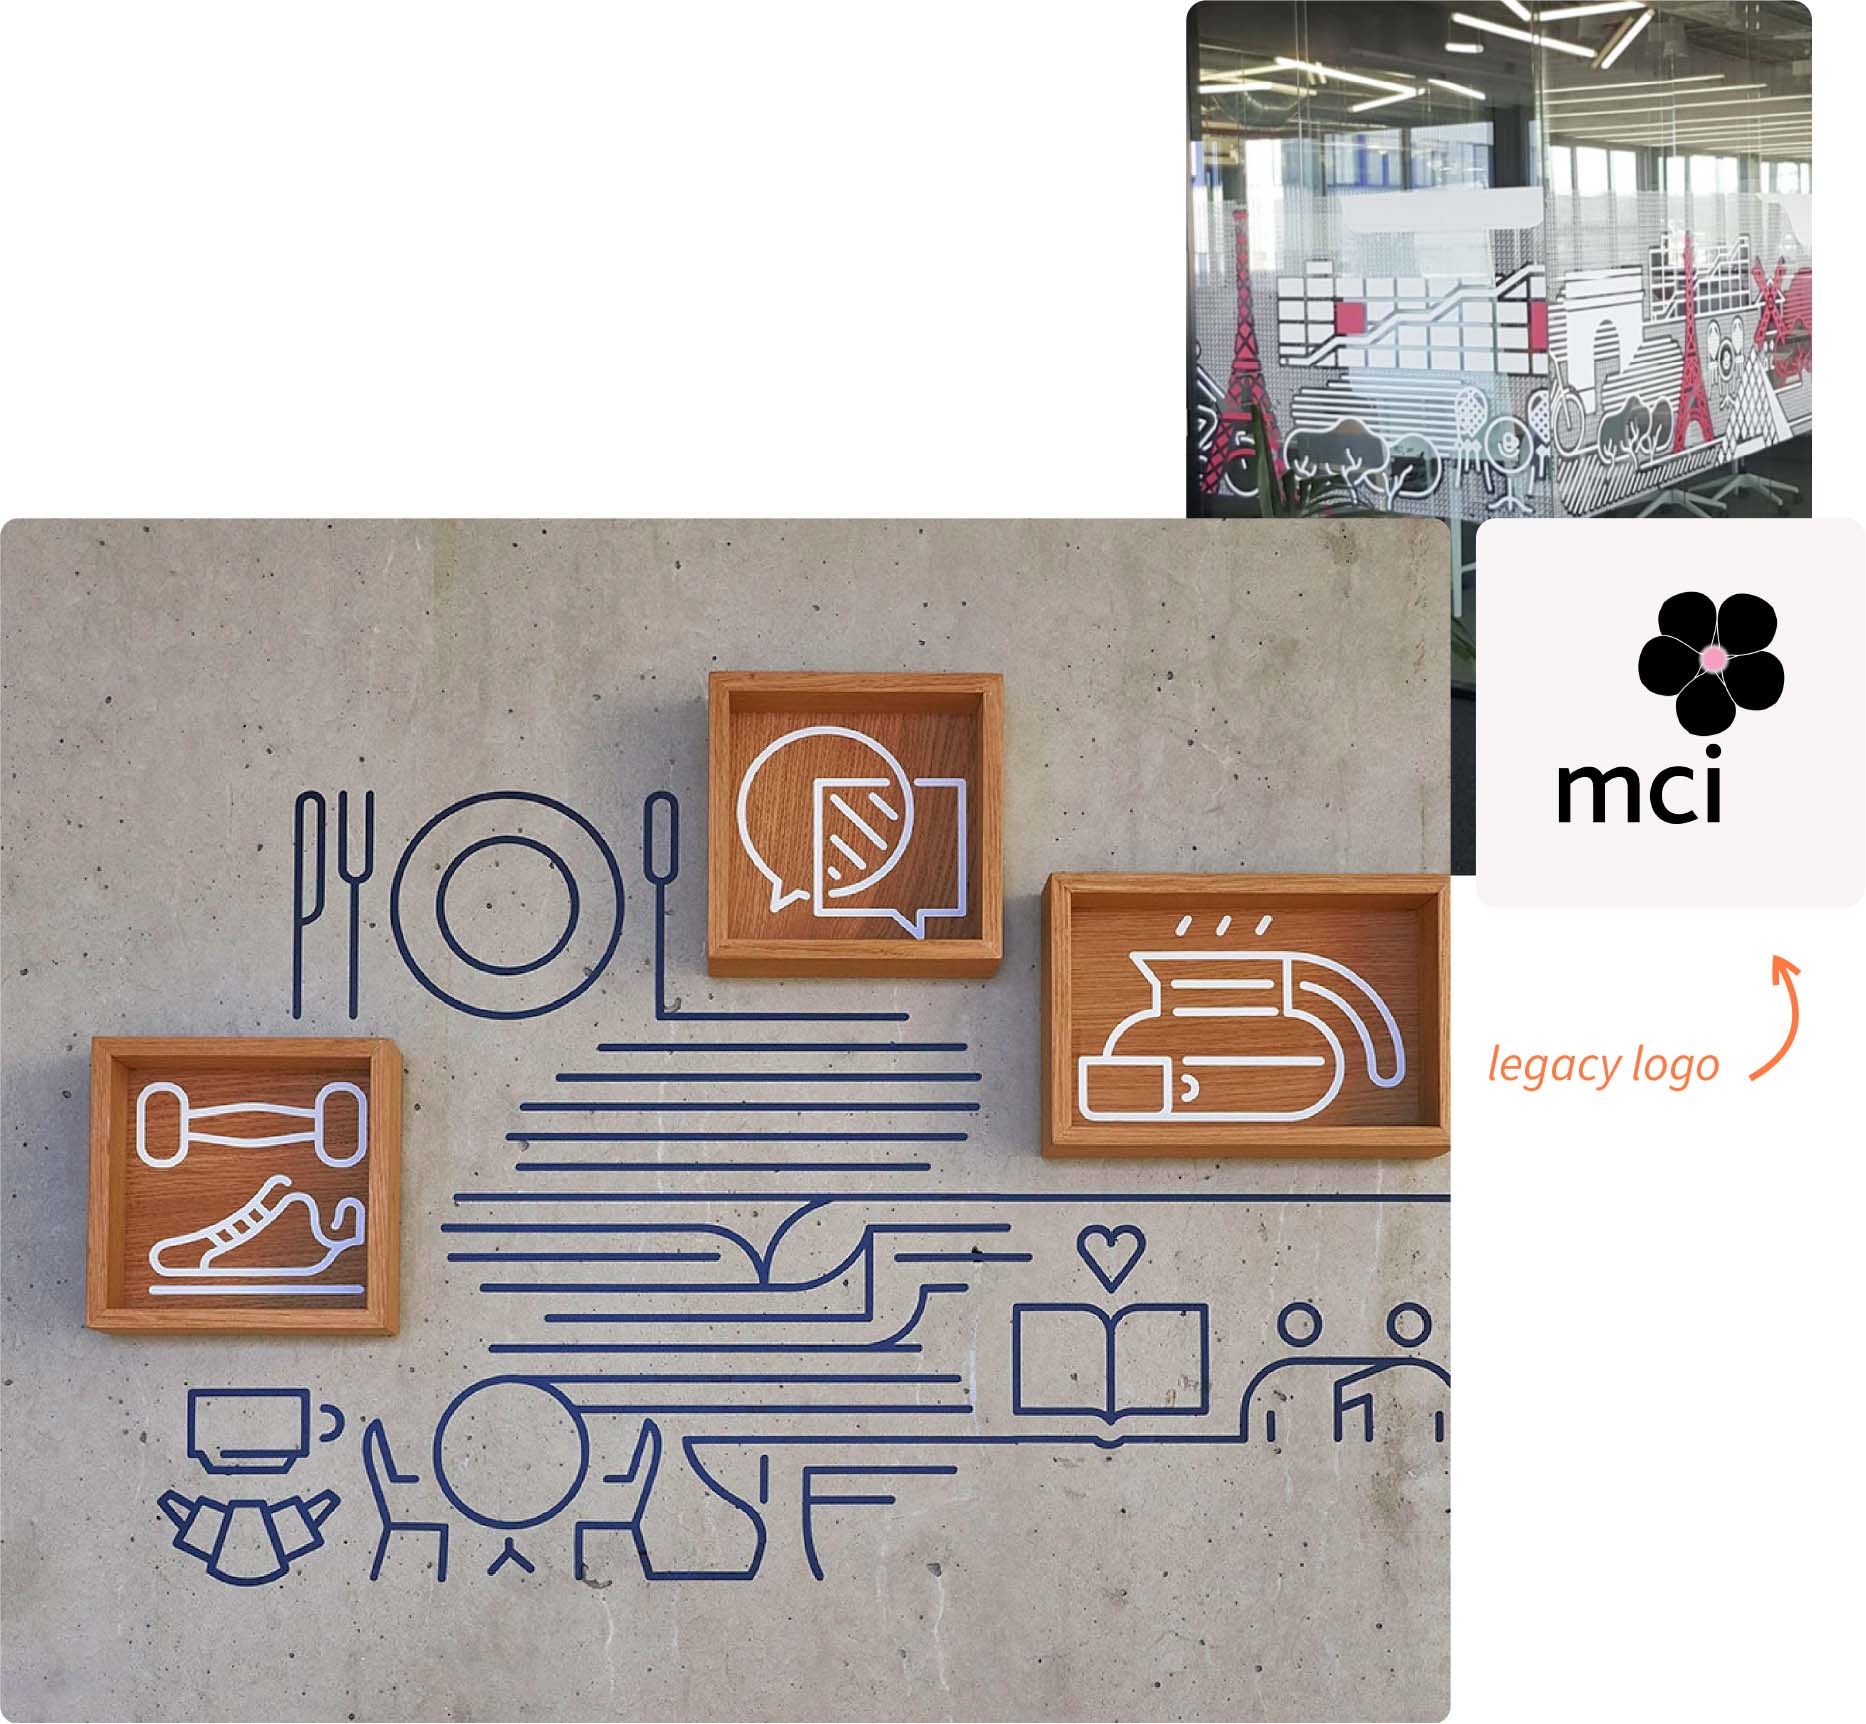 MCI before being rebranded